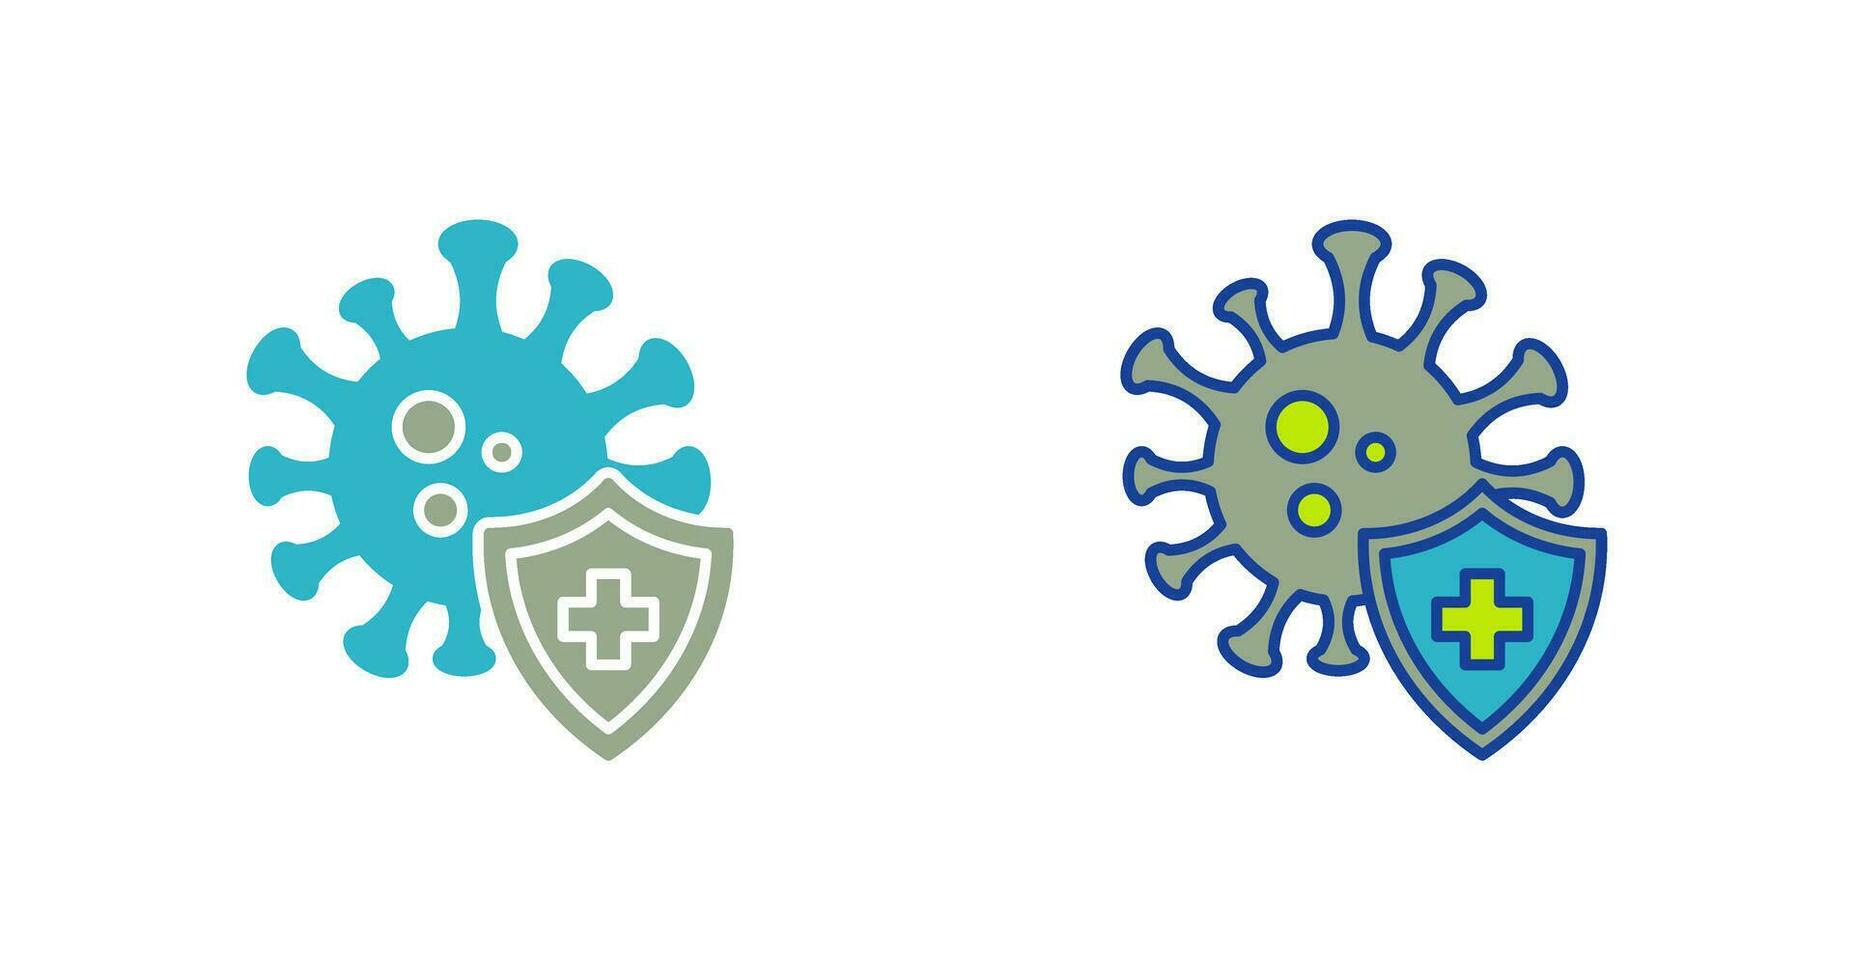 Medical Protection Vector Icon